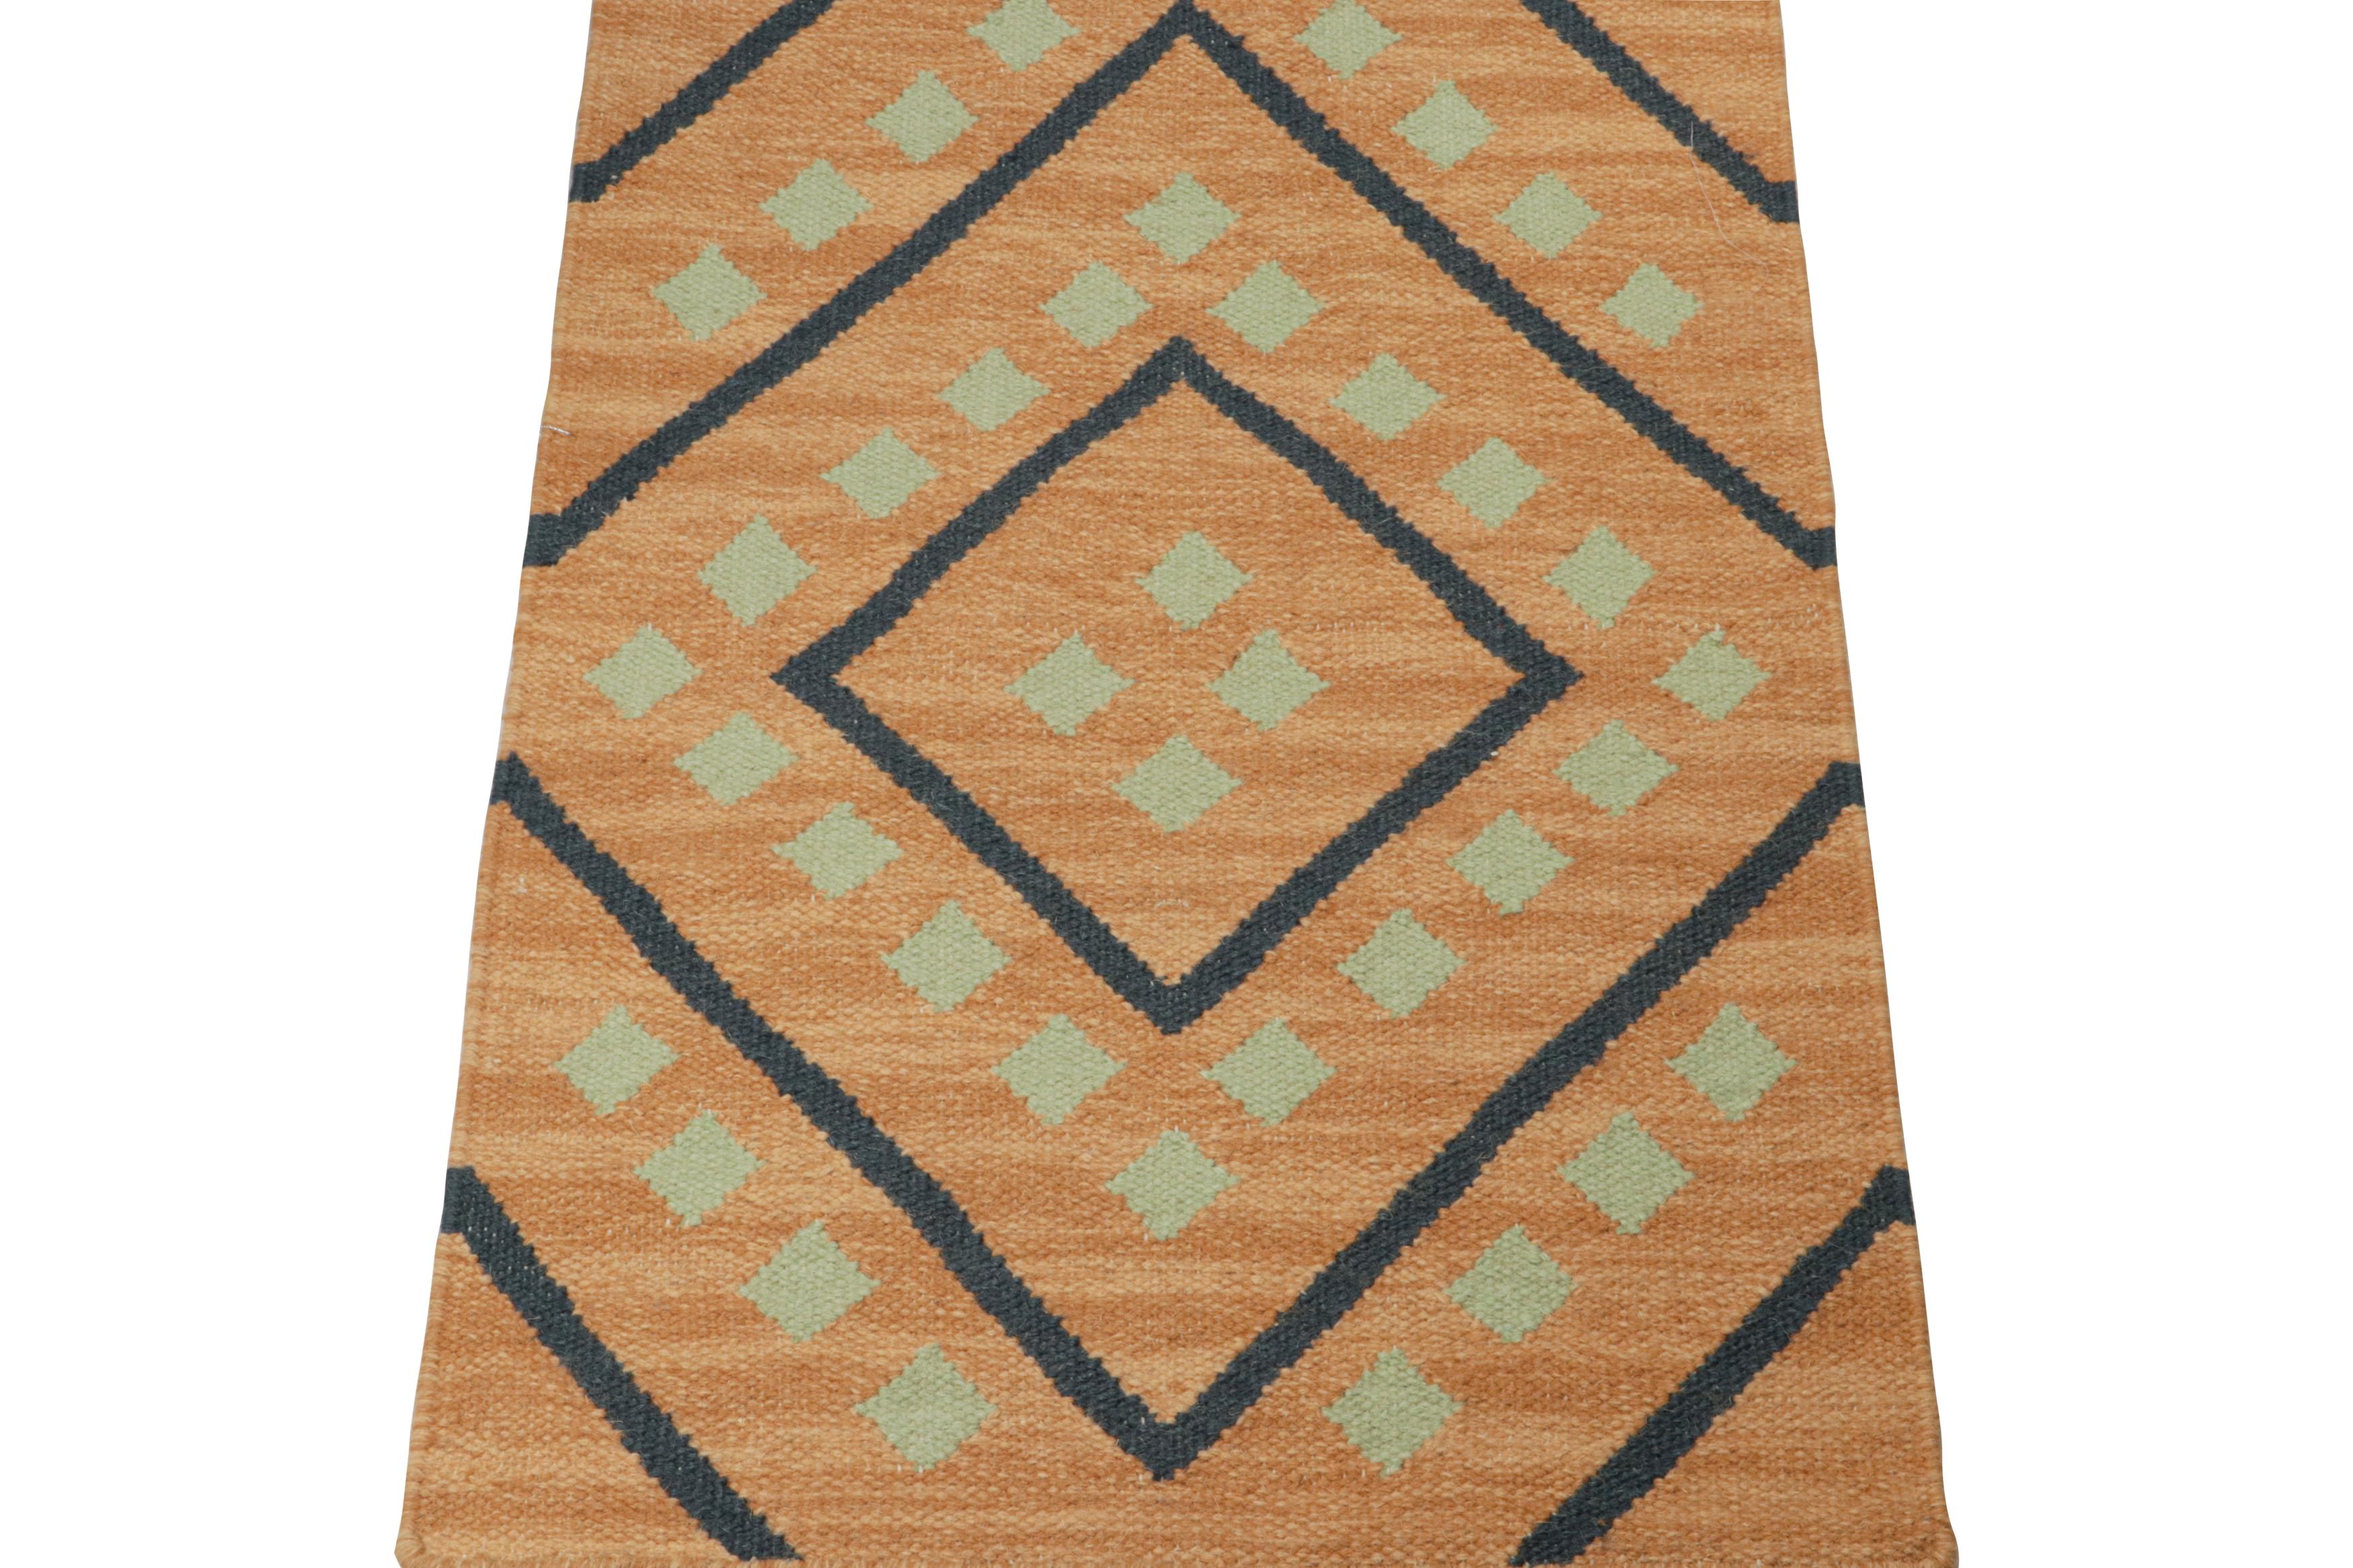 Modern Rug & Kilim’s Tribal style Kilim in Gold with Black & Green Patterns For Sale